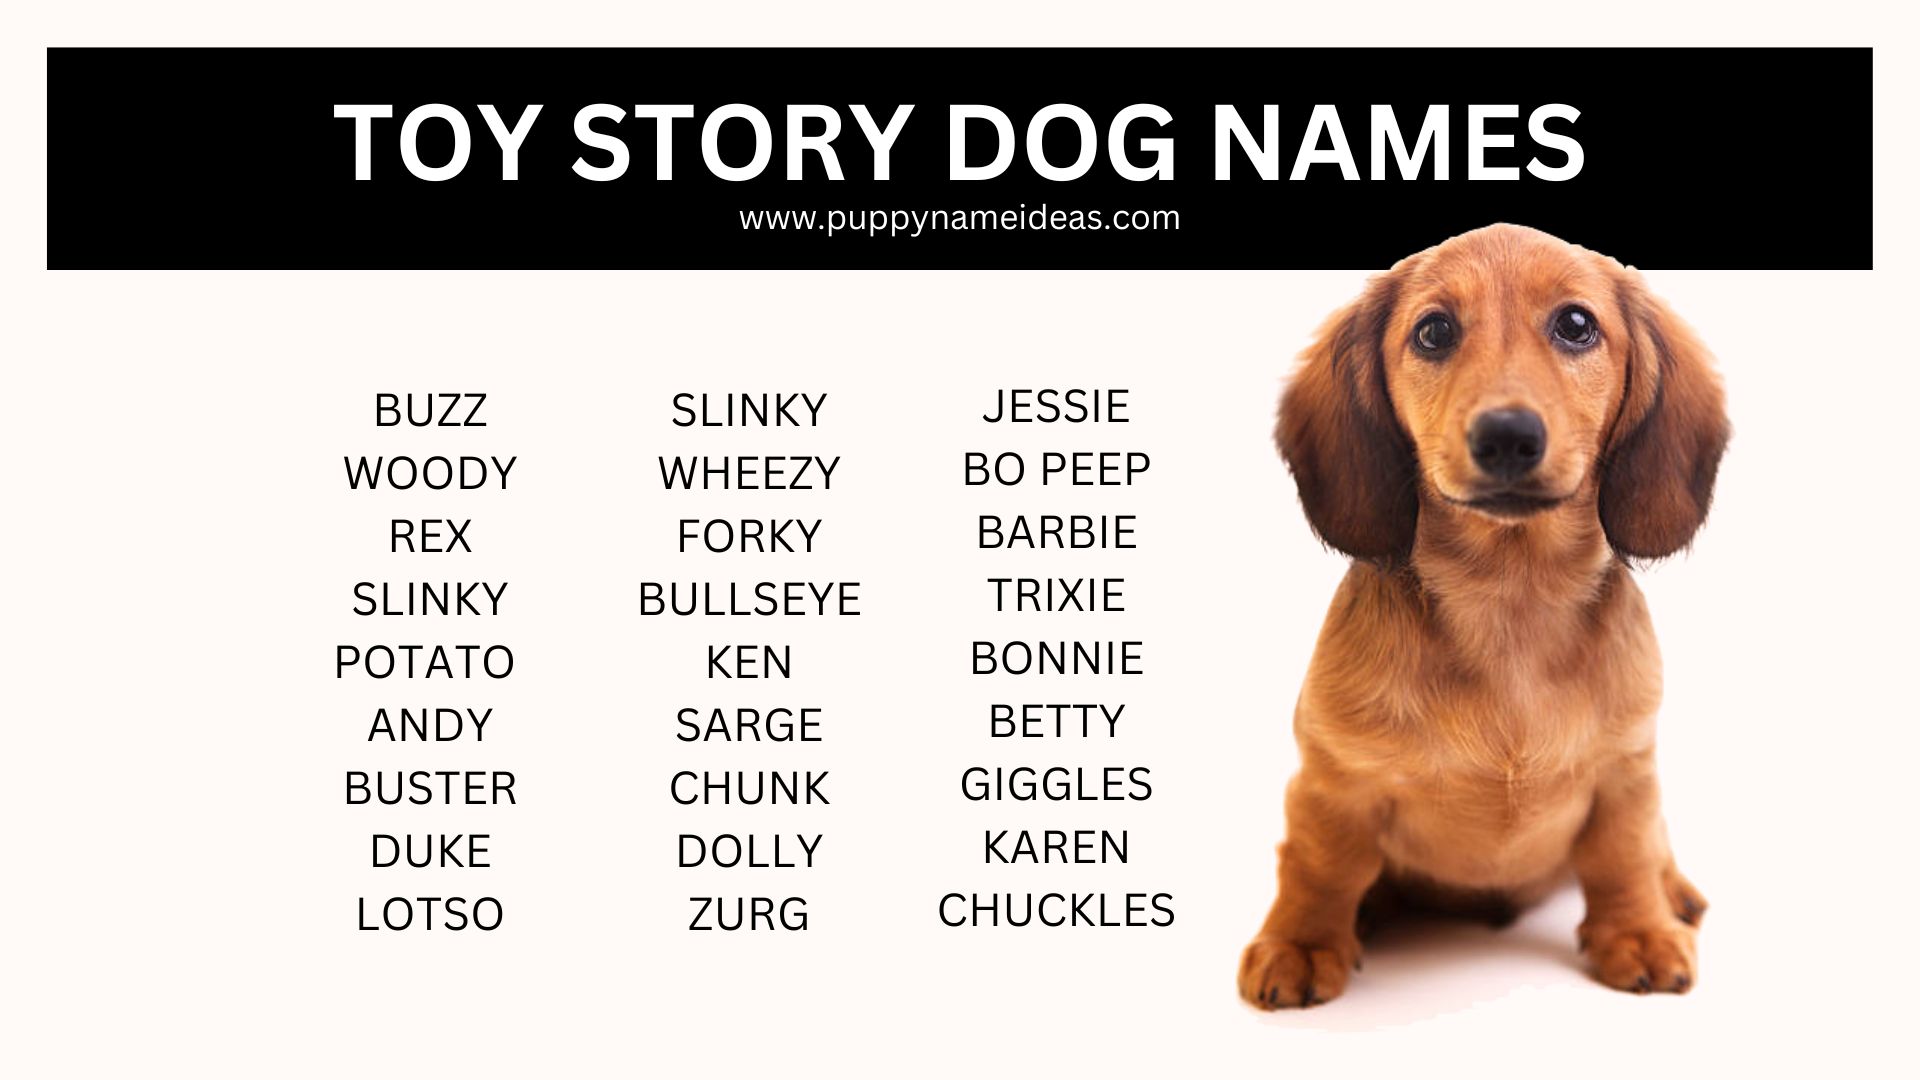 70+ Toy Story Dog Names